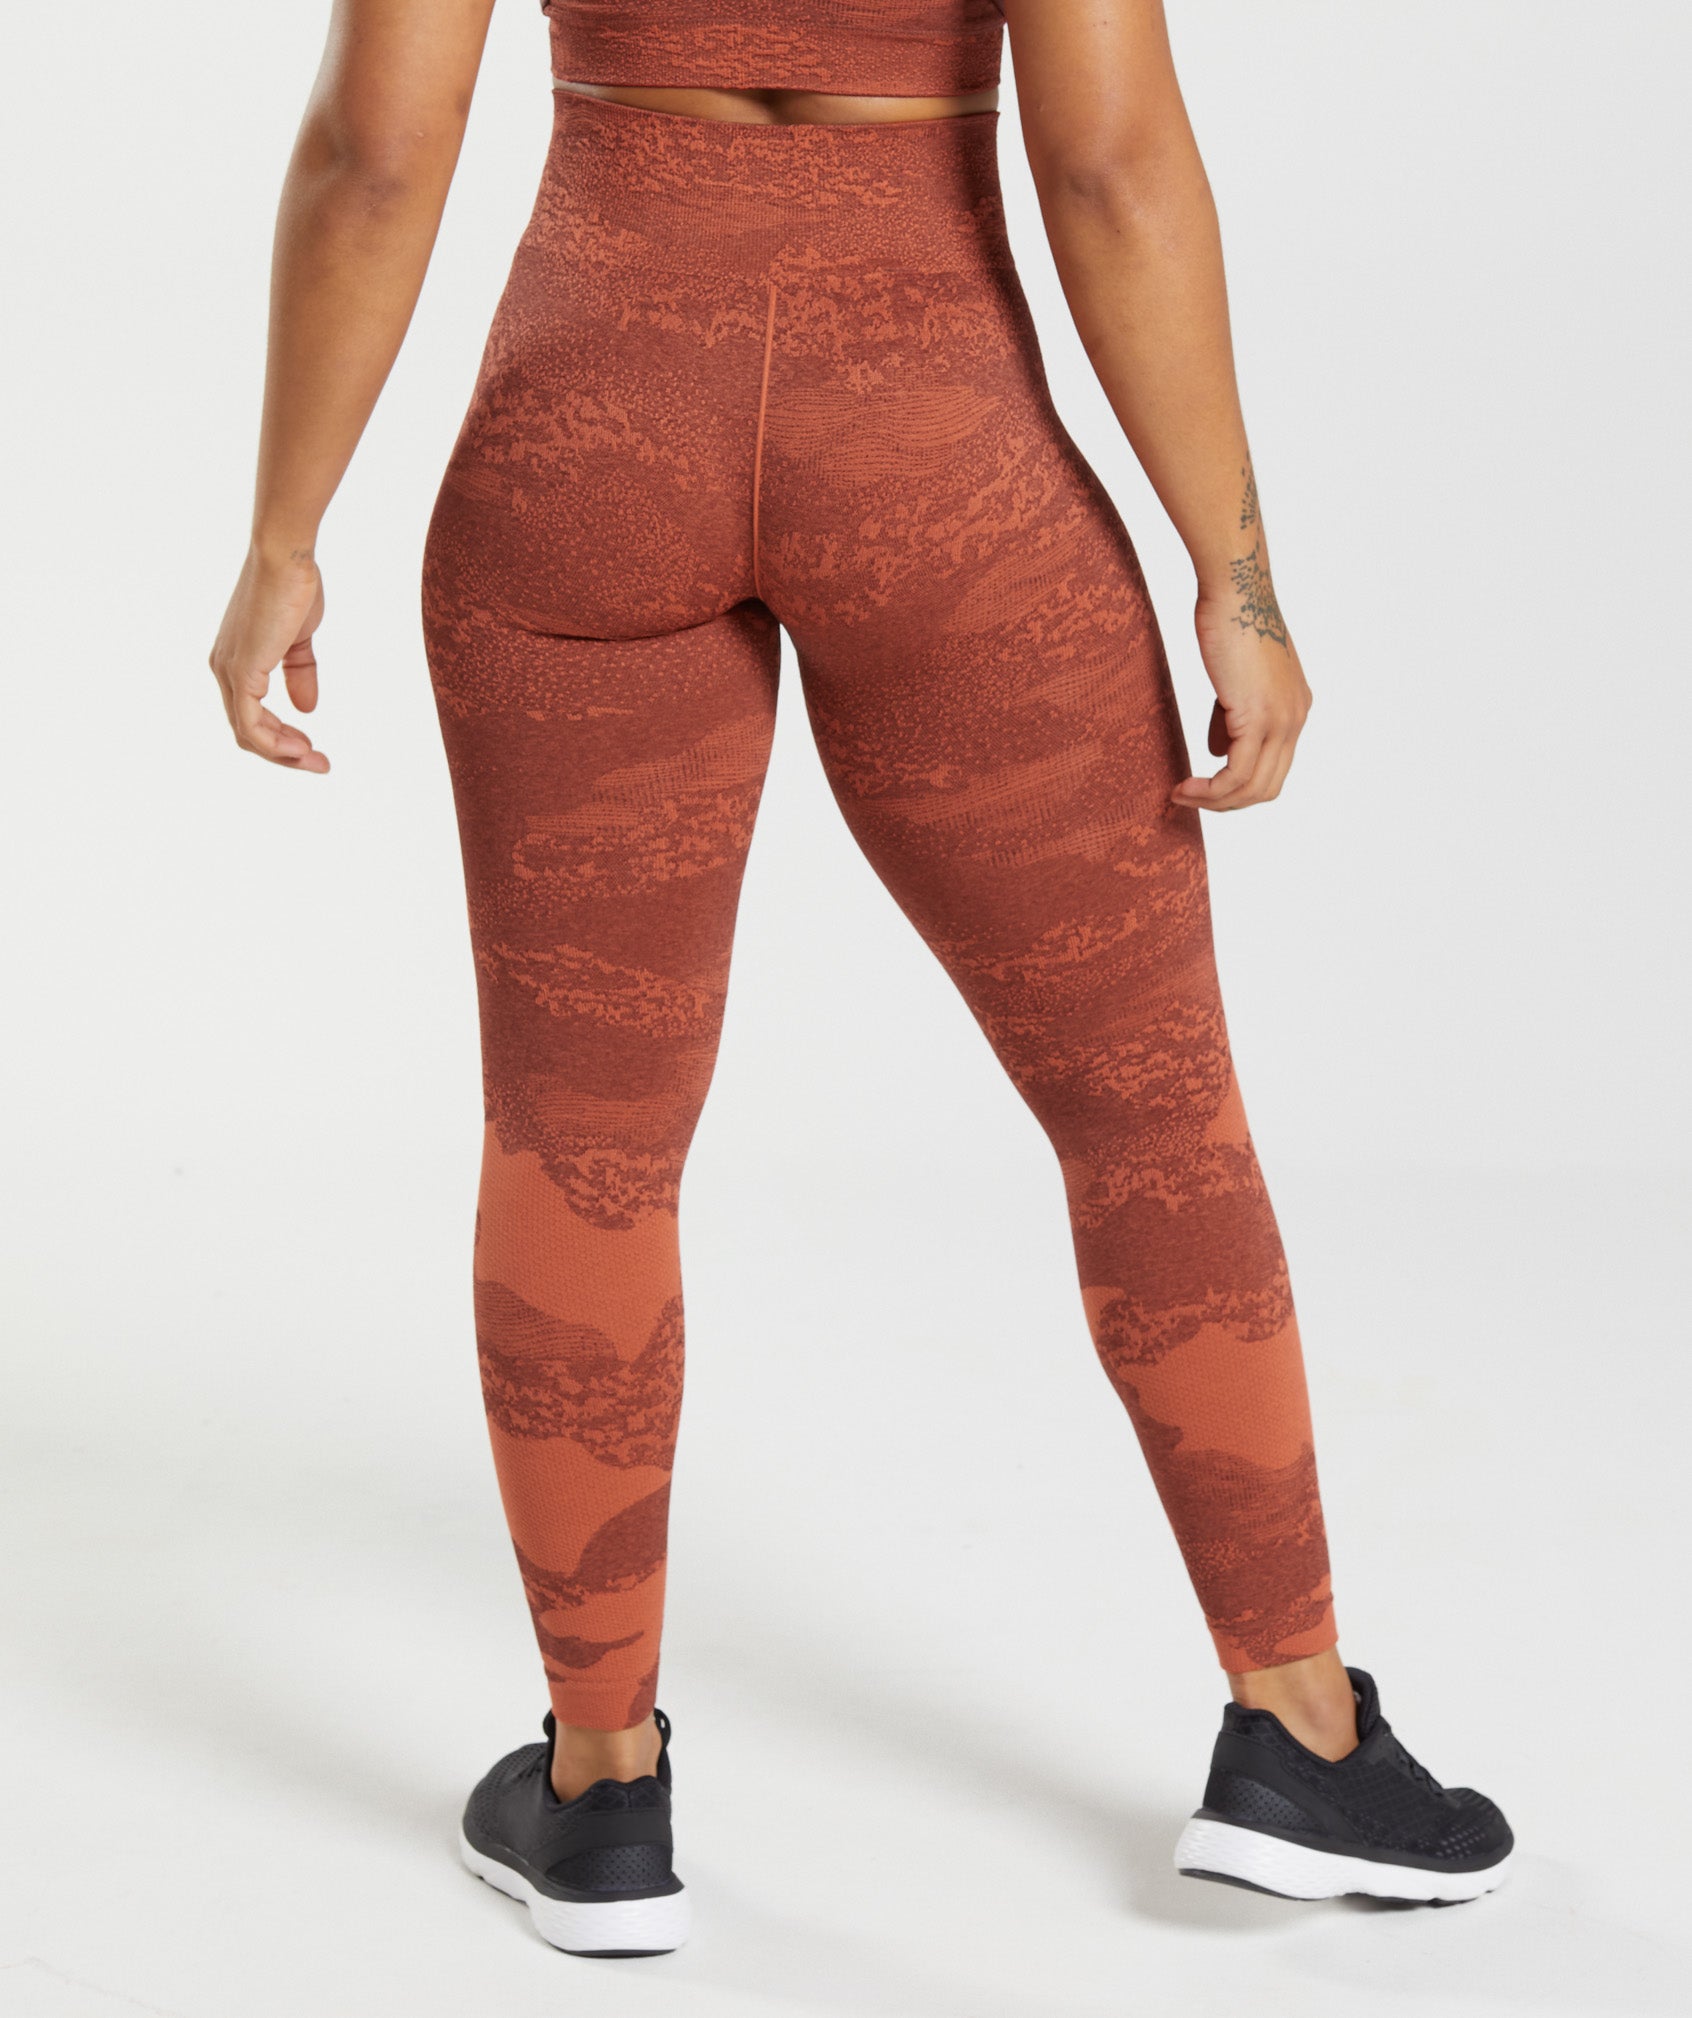 Adapt Camo Seamless Leggings in Storm Red/Cherry Brown - view 2